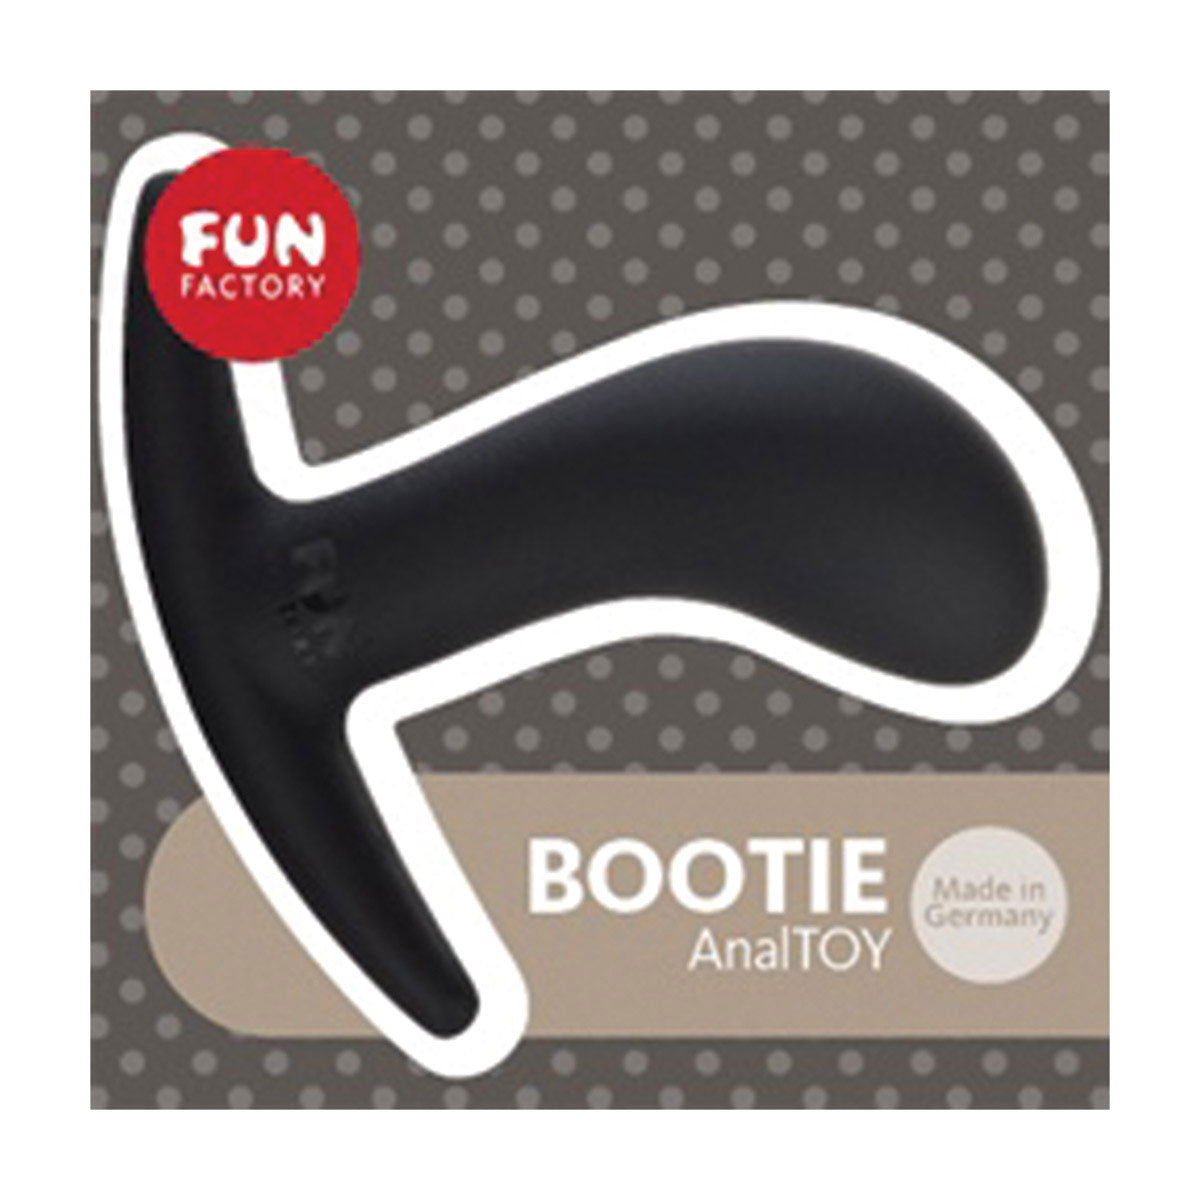 Fun Factory Bootie Curved Beginner's Butt Plug - Small Black